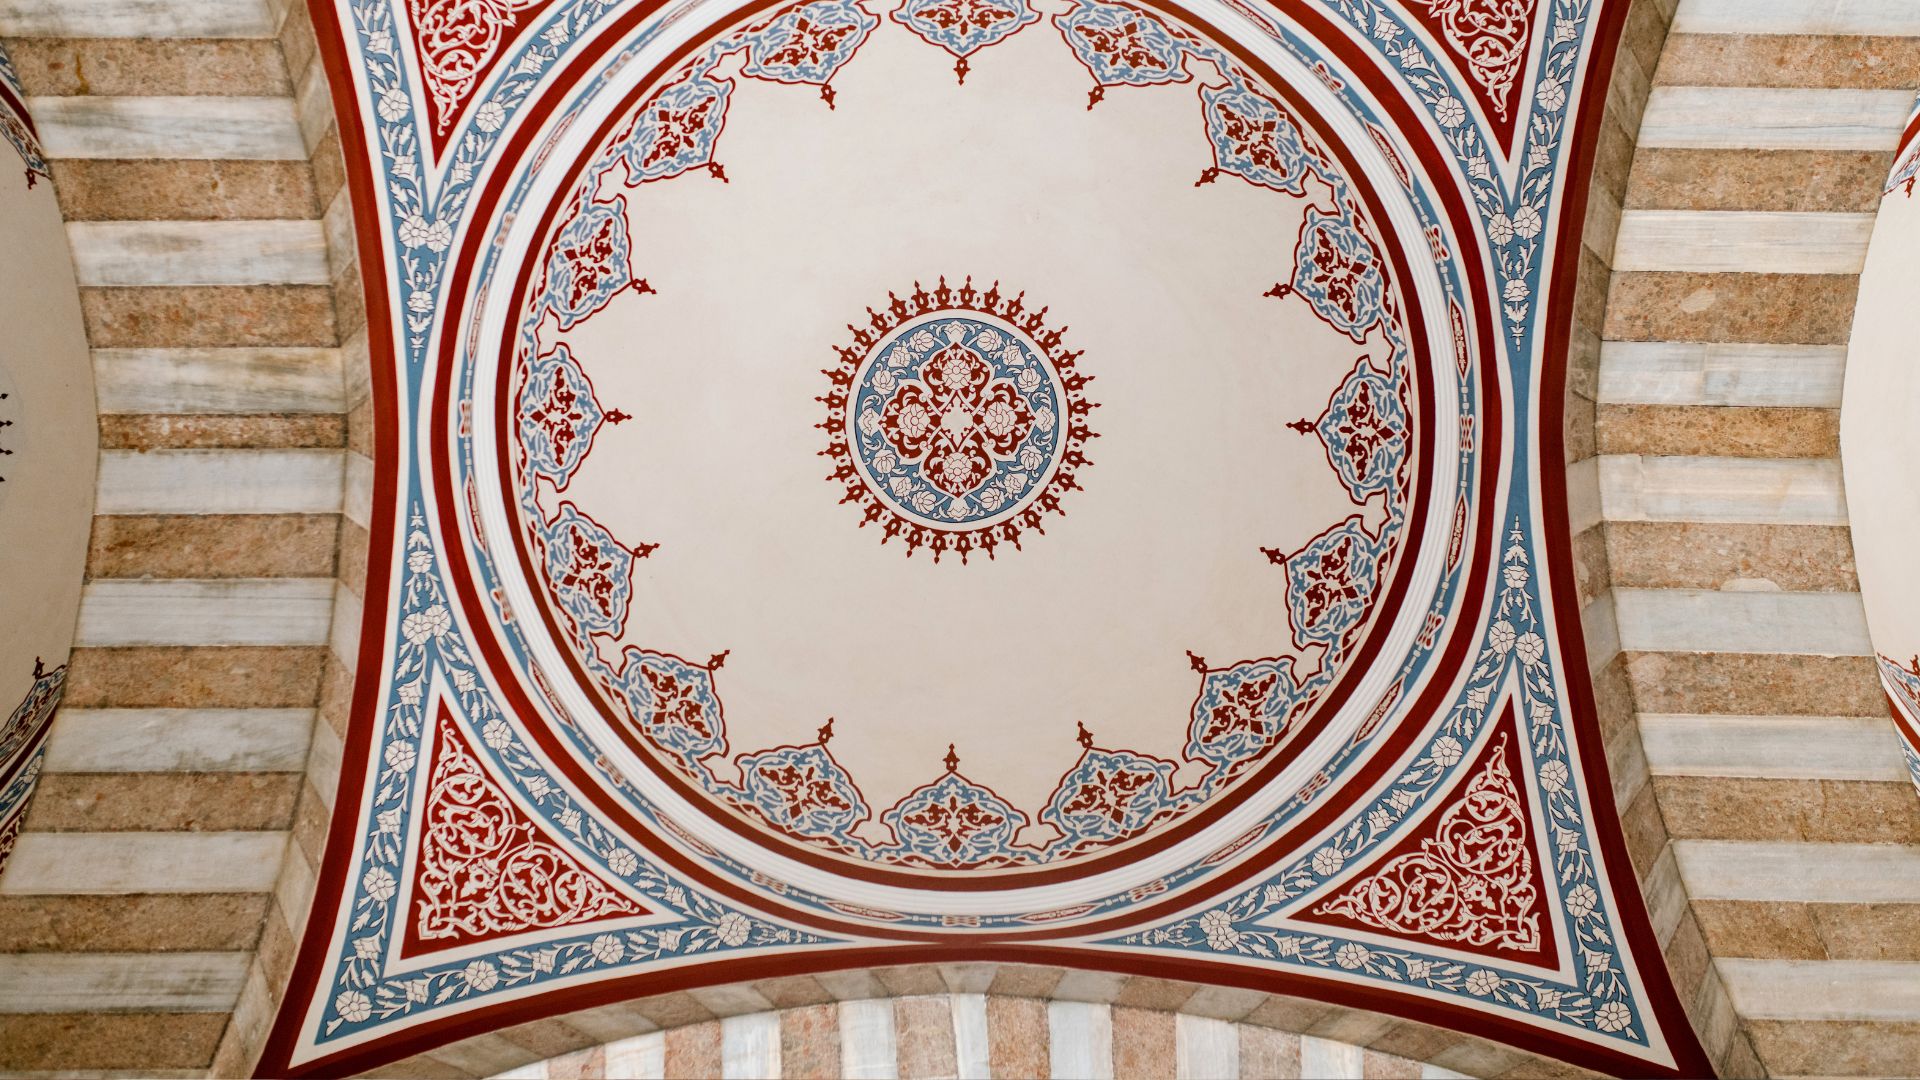 Ornamental ceiling with colorful oriental mural in mosque